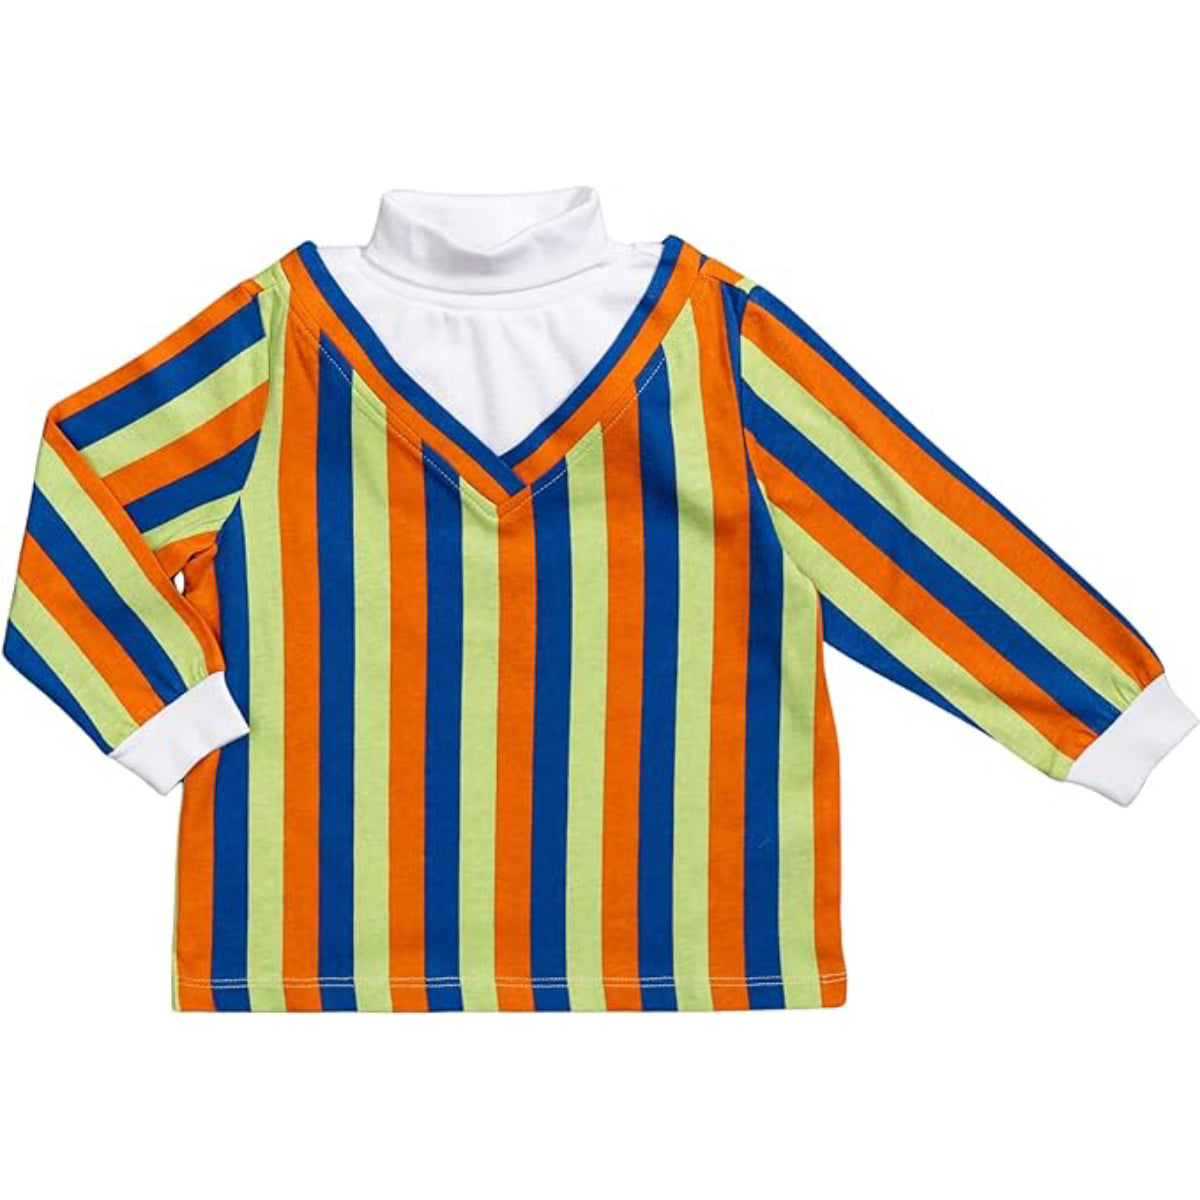 Bert and Ernie Kids Long Sleeve T-Shirts Perfect for Halloween Costume Cosplay Front